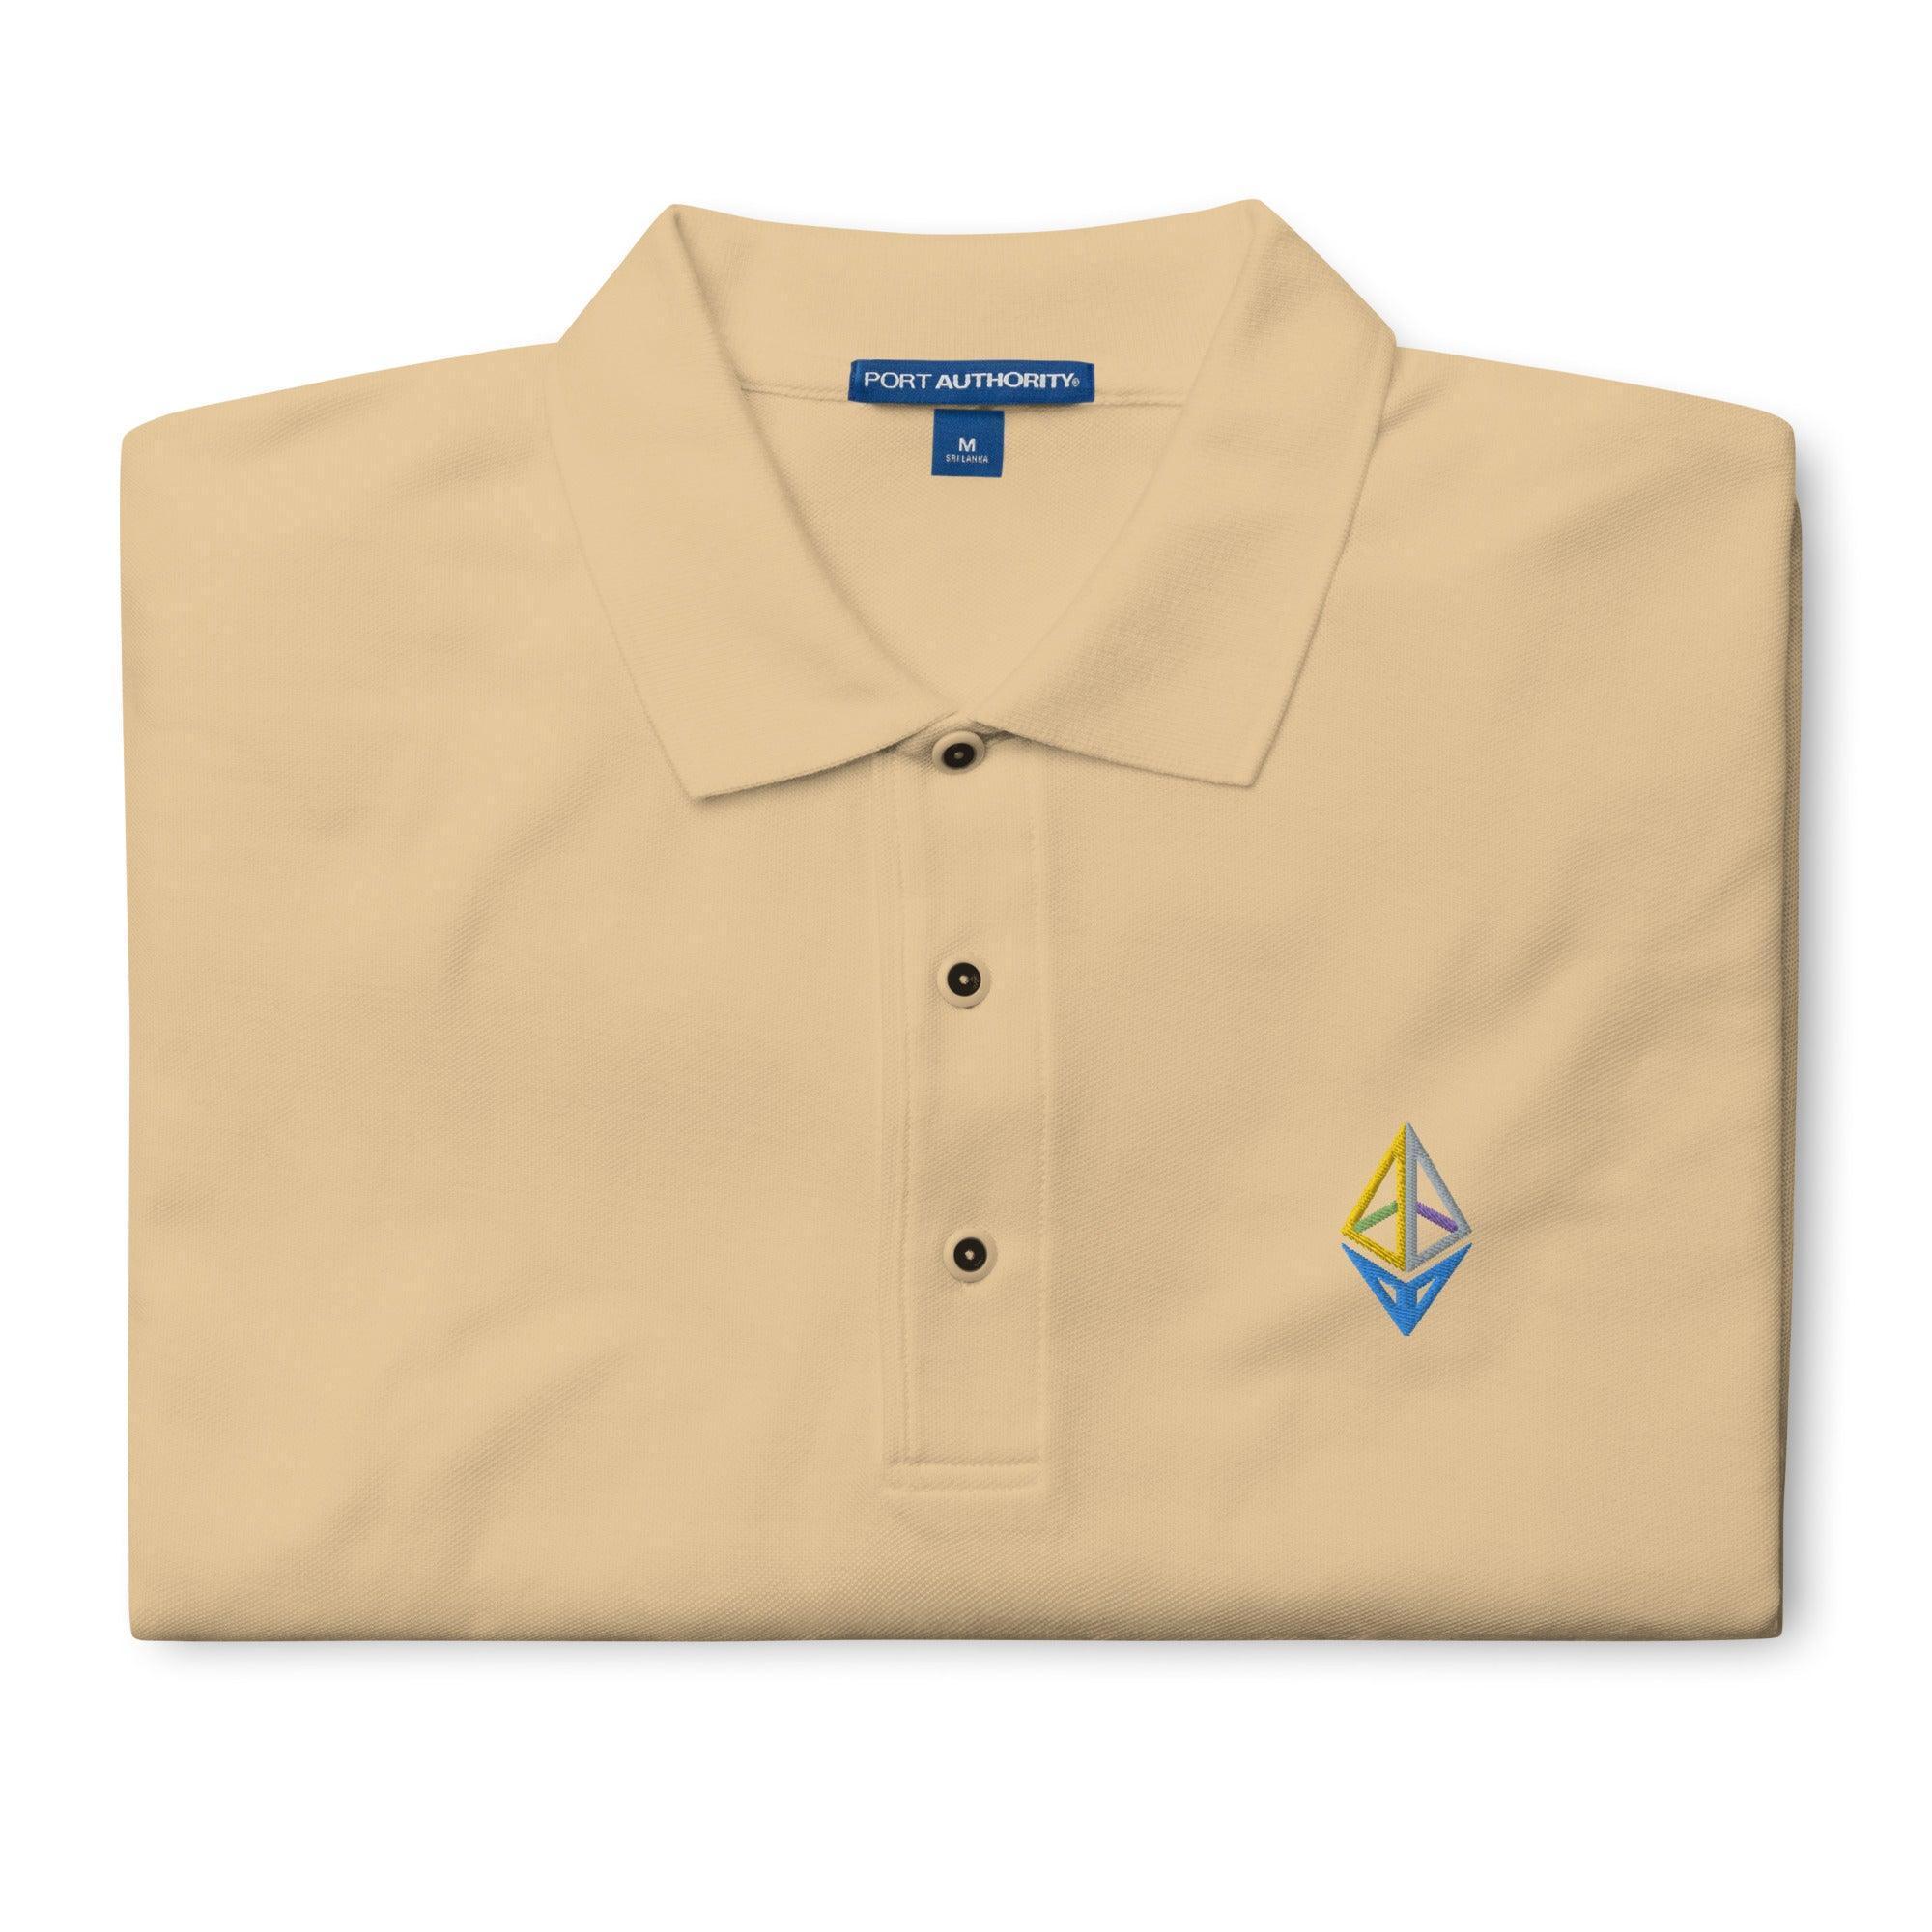 Ethereum Colorful Polo Shirt - InvestmenTees